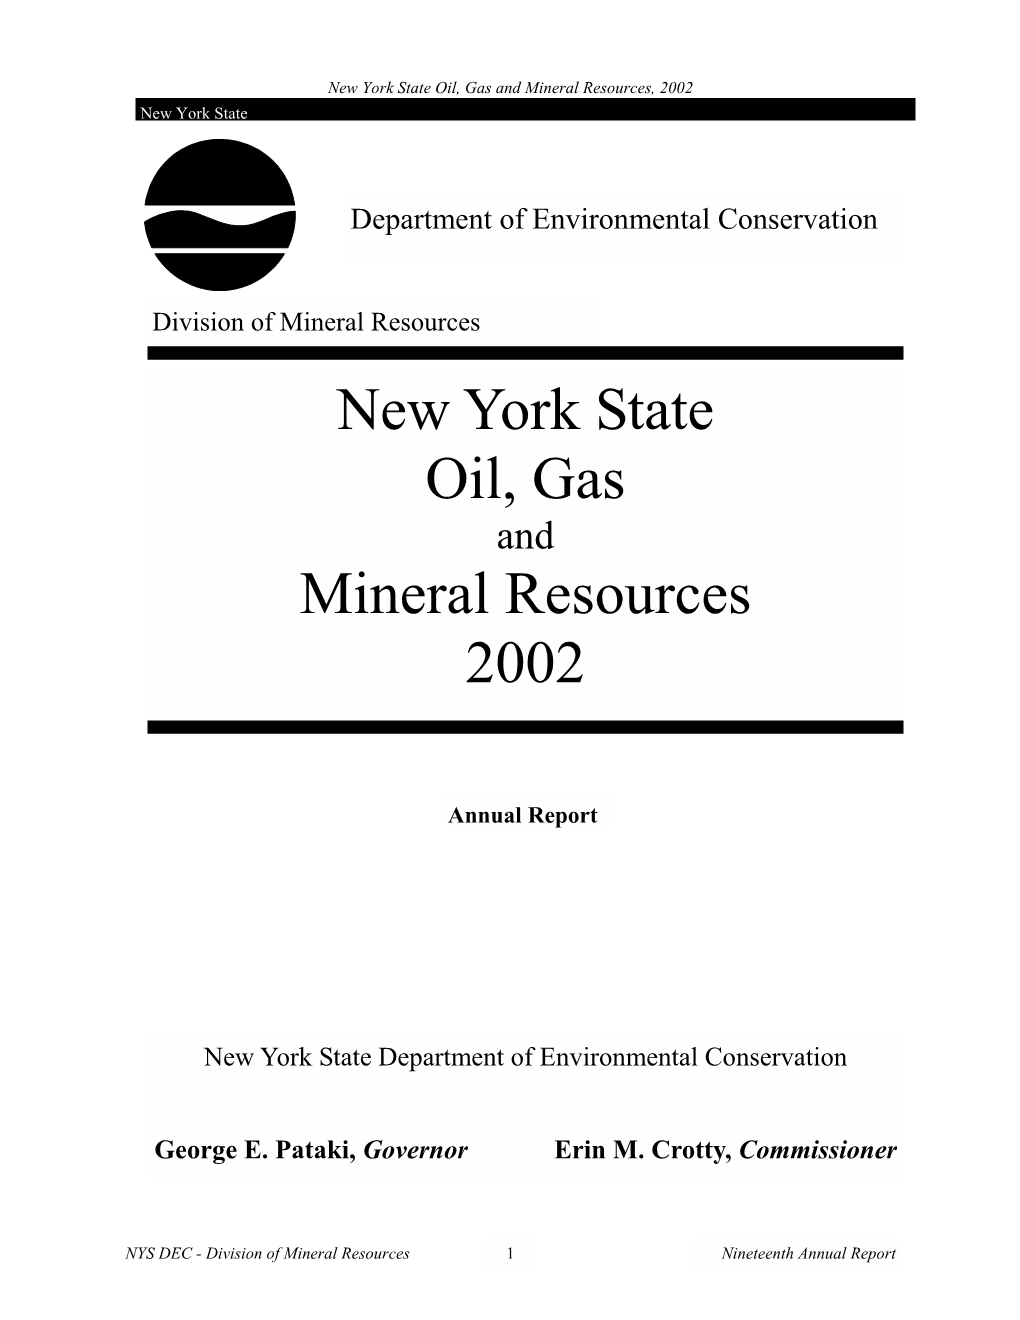 New York State Oil, Gas Mineral Resources 2002